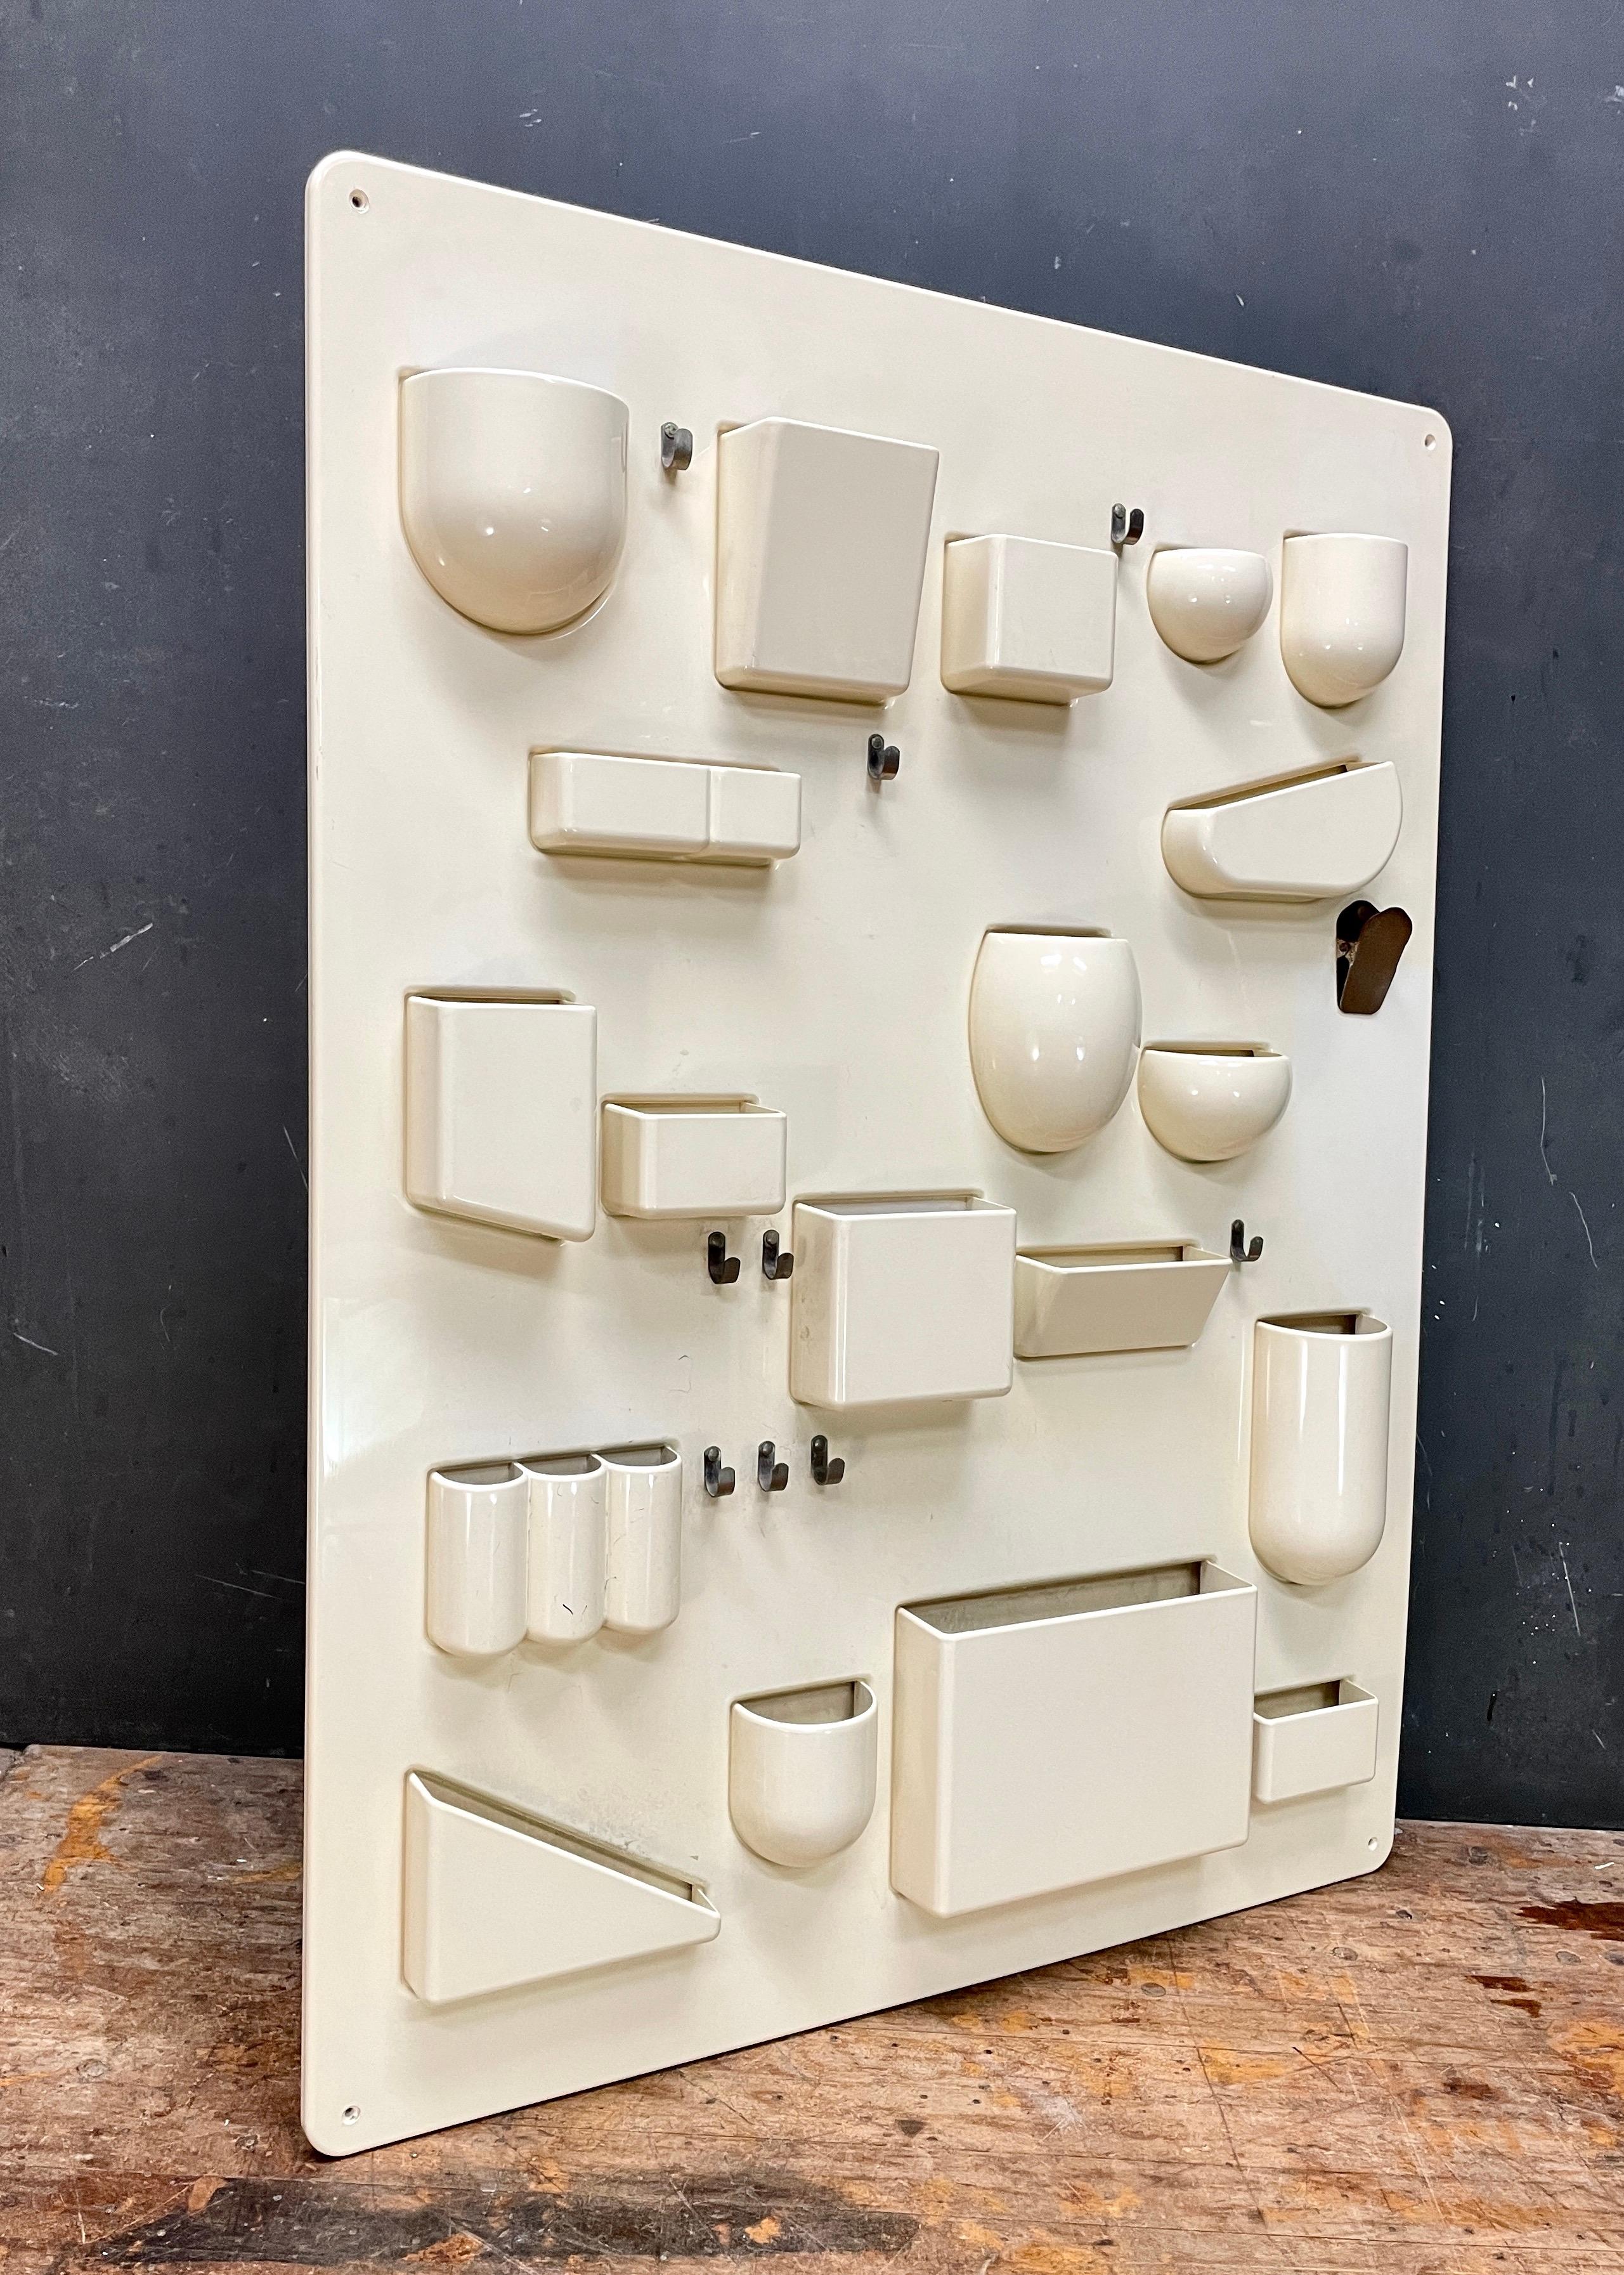 Super cool first production and large version. The original vintage Uten.Silo I wall organizer. Designed by Dorothee Maurer Becker in 1969. 

This one is Off-White and has some yellowing and fading throughout, ink marks, light scratches, oxidation